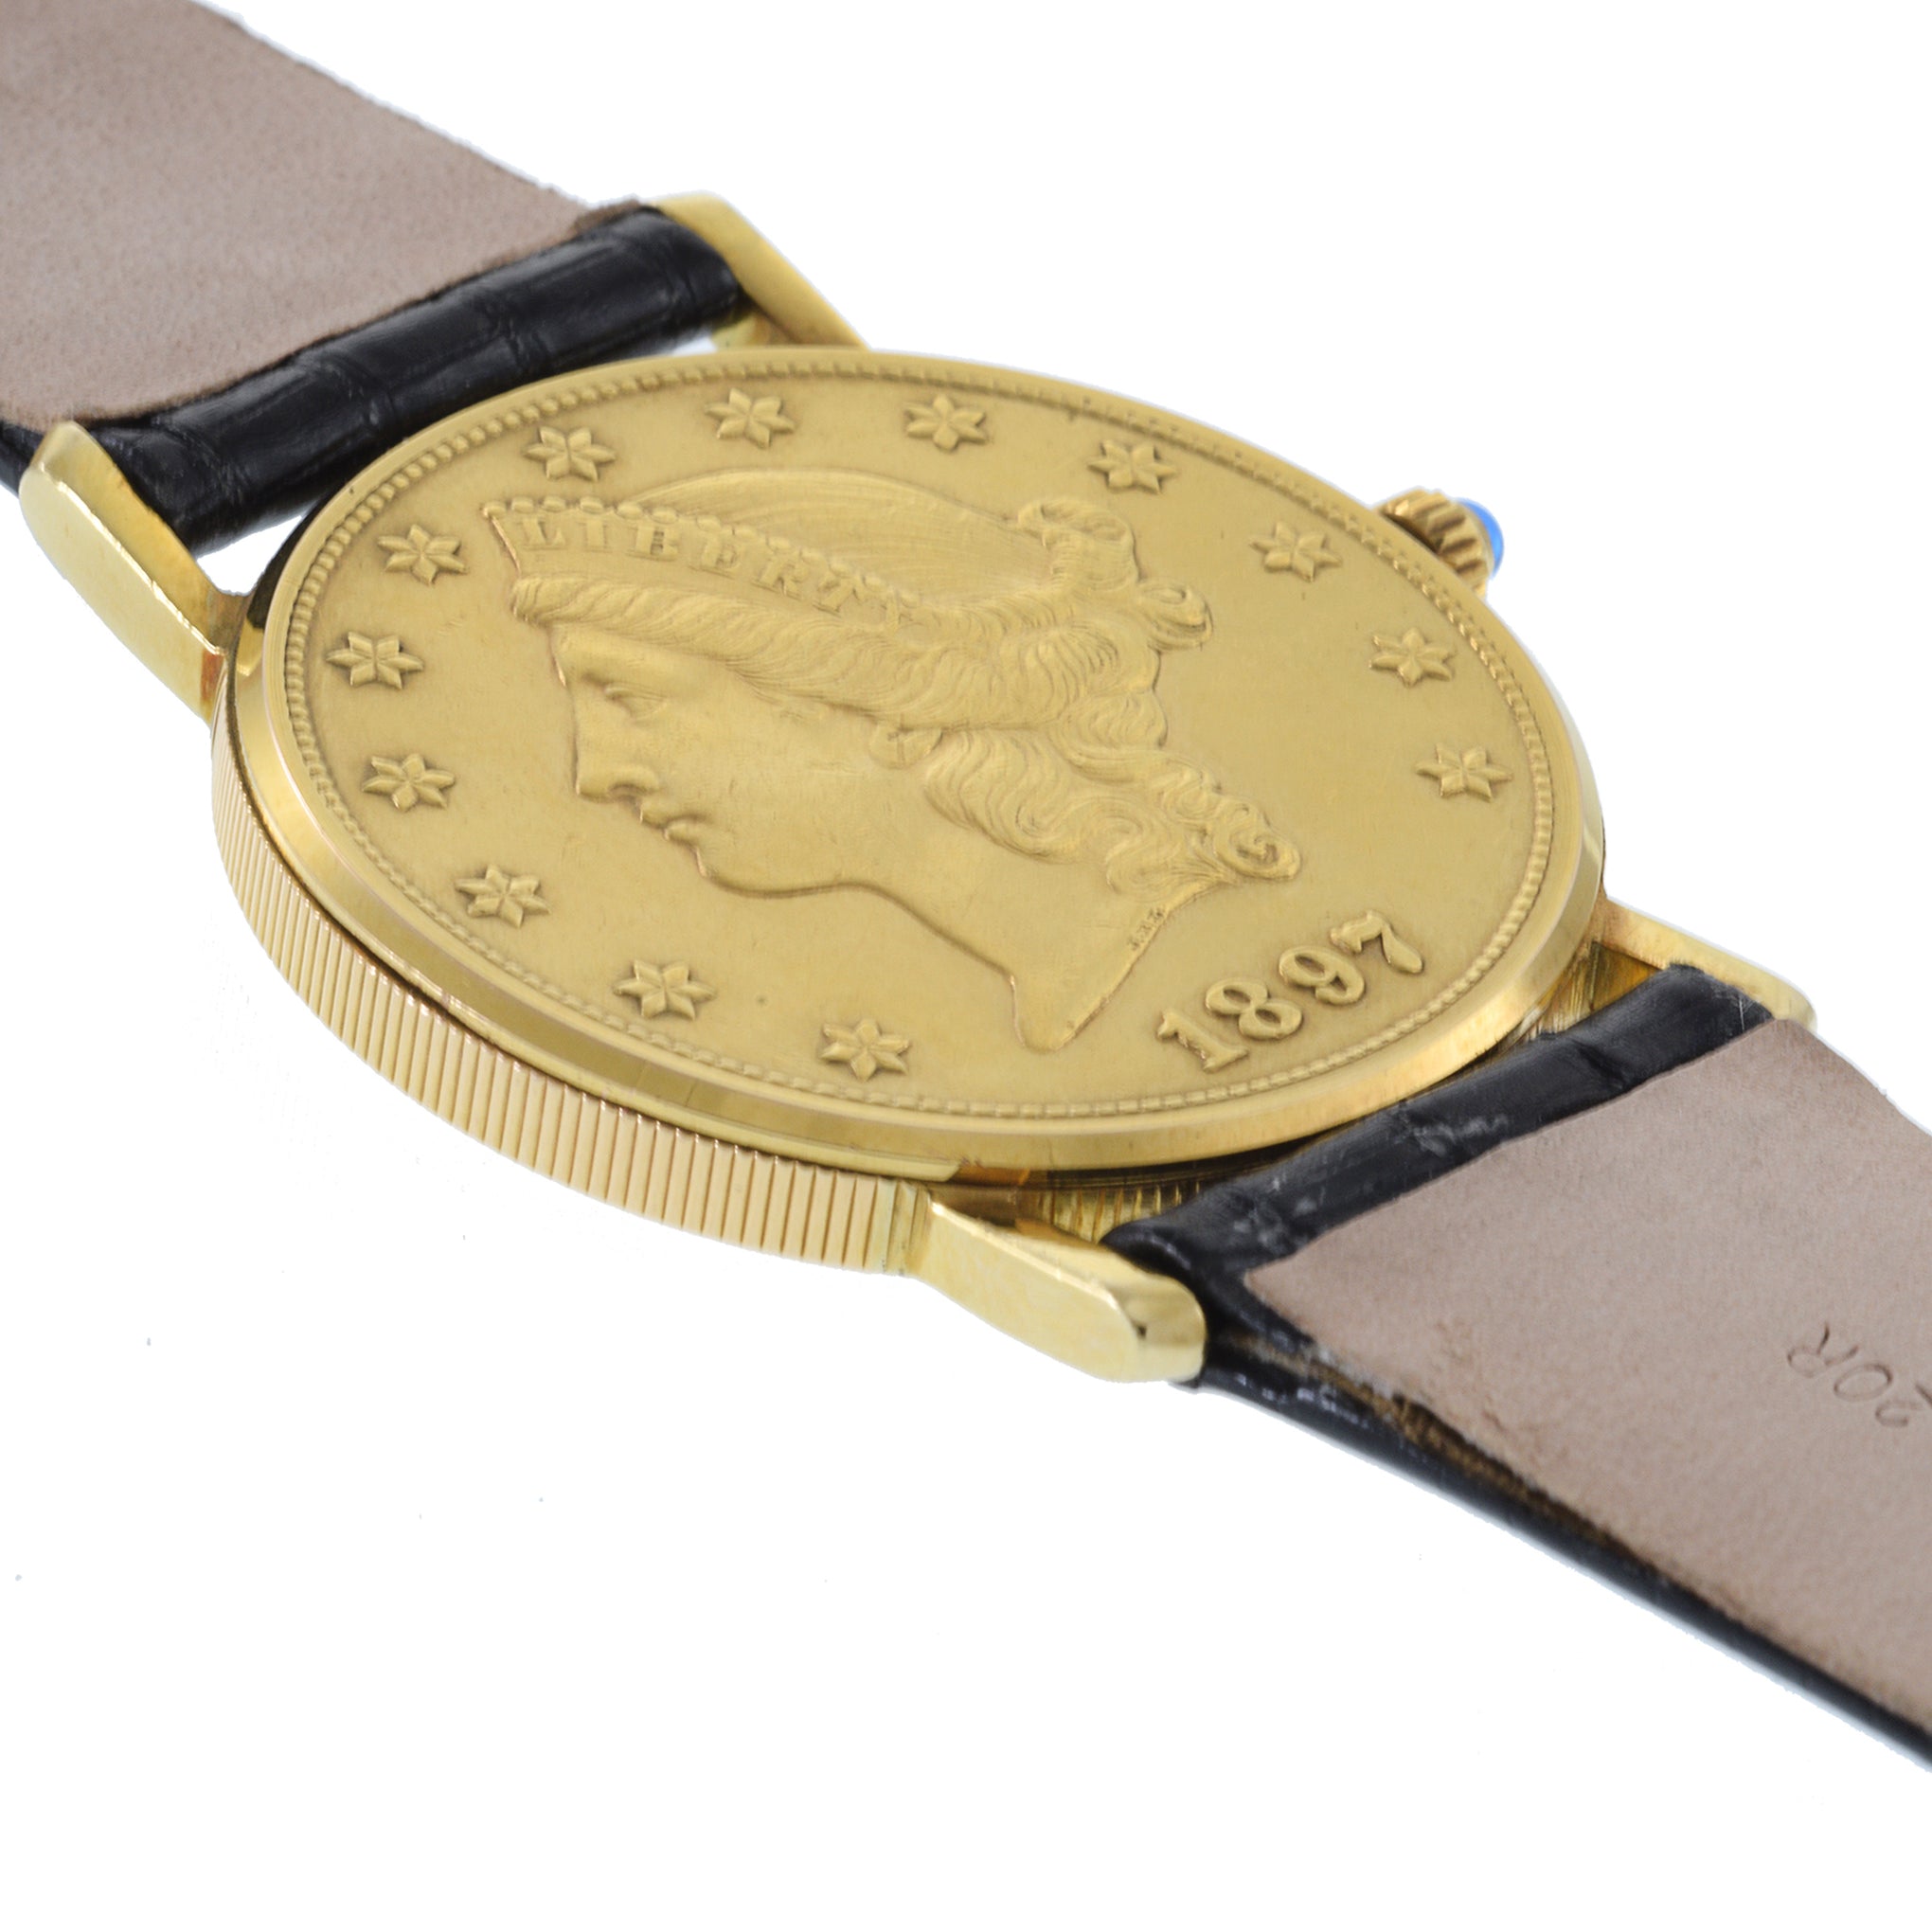 Corum 1897 $20 Coin Watch 18K Gold Case and 22K Gold Coin